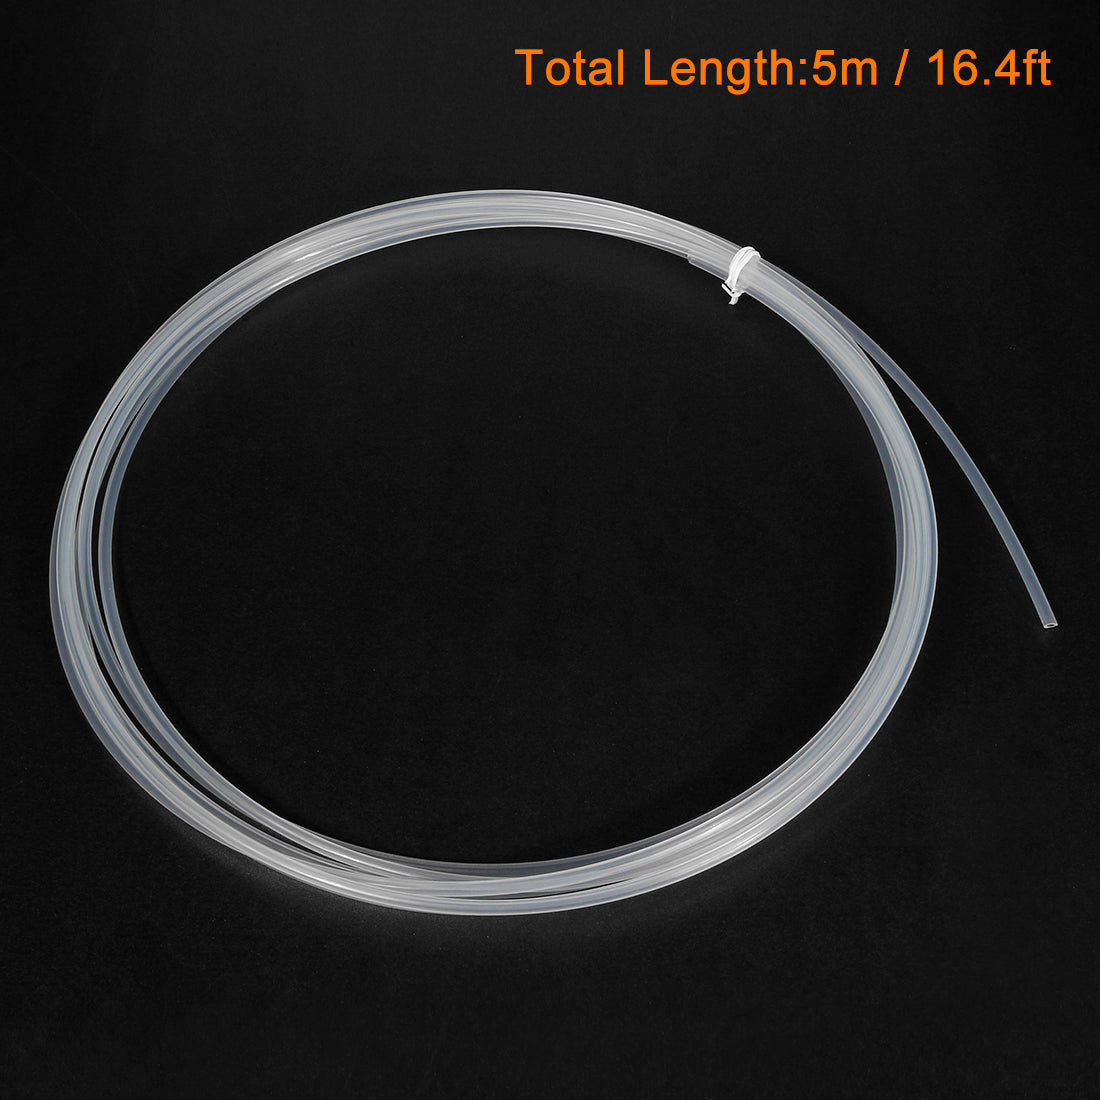 uxcell Uxcell PTFE Tube Tubing 5 Meter 16.4ft Lengh for 3.0 Filament Pipe 2mm ID 4mm OD for 3D Printer RepRap